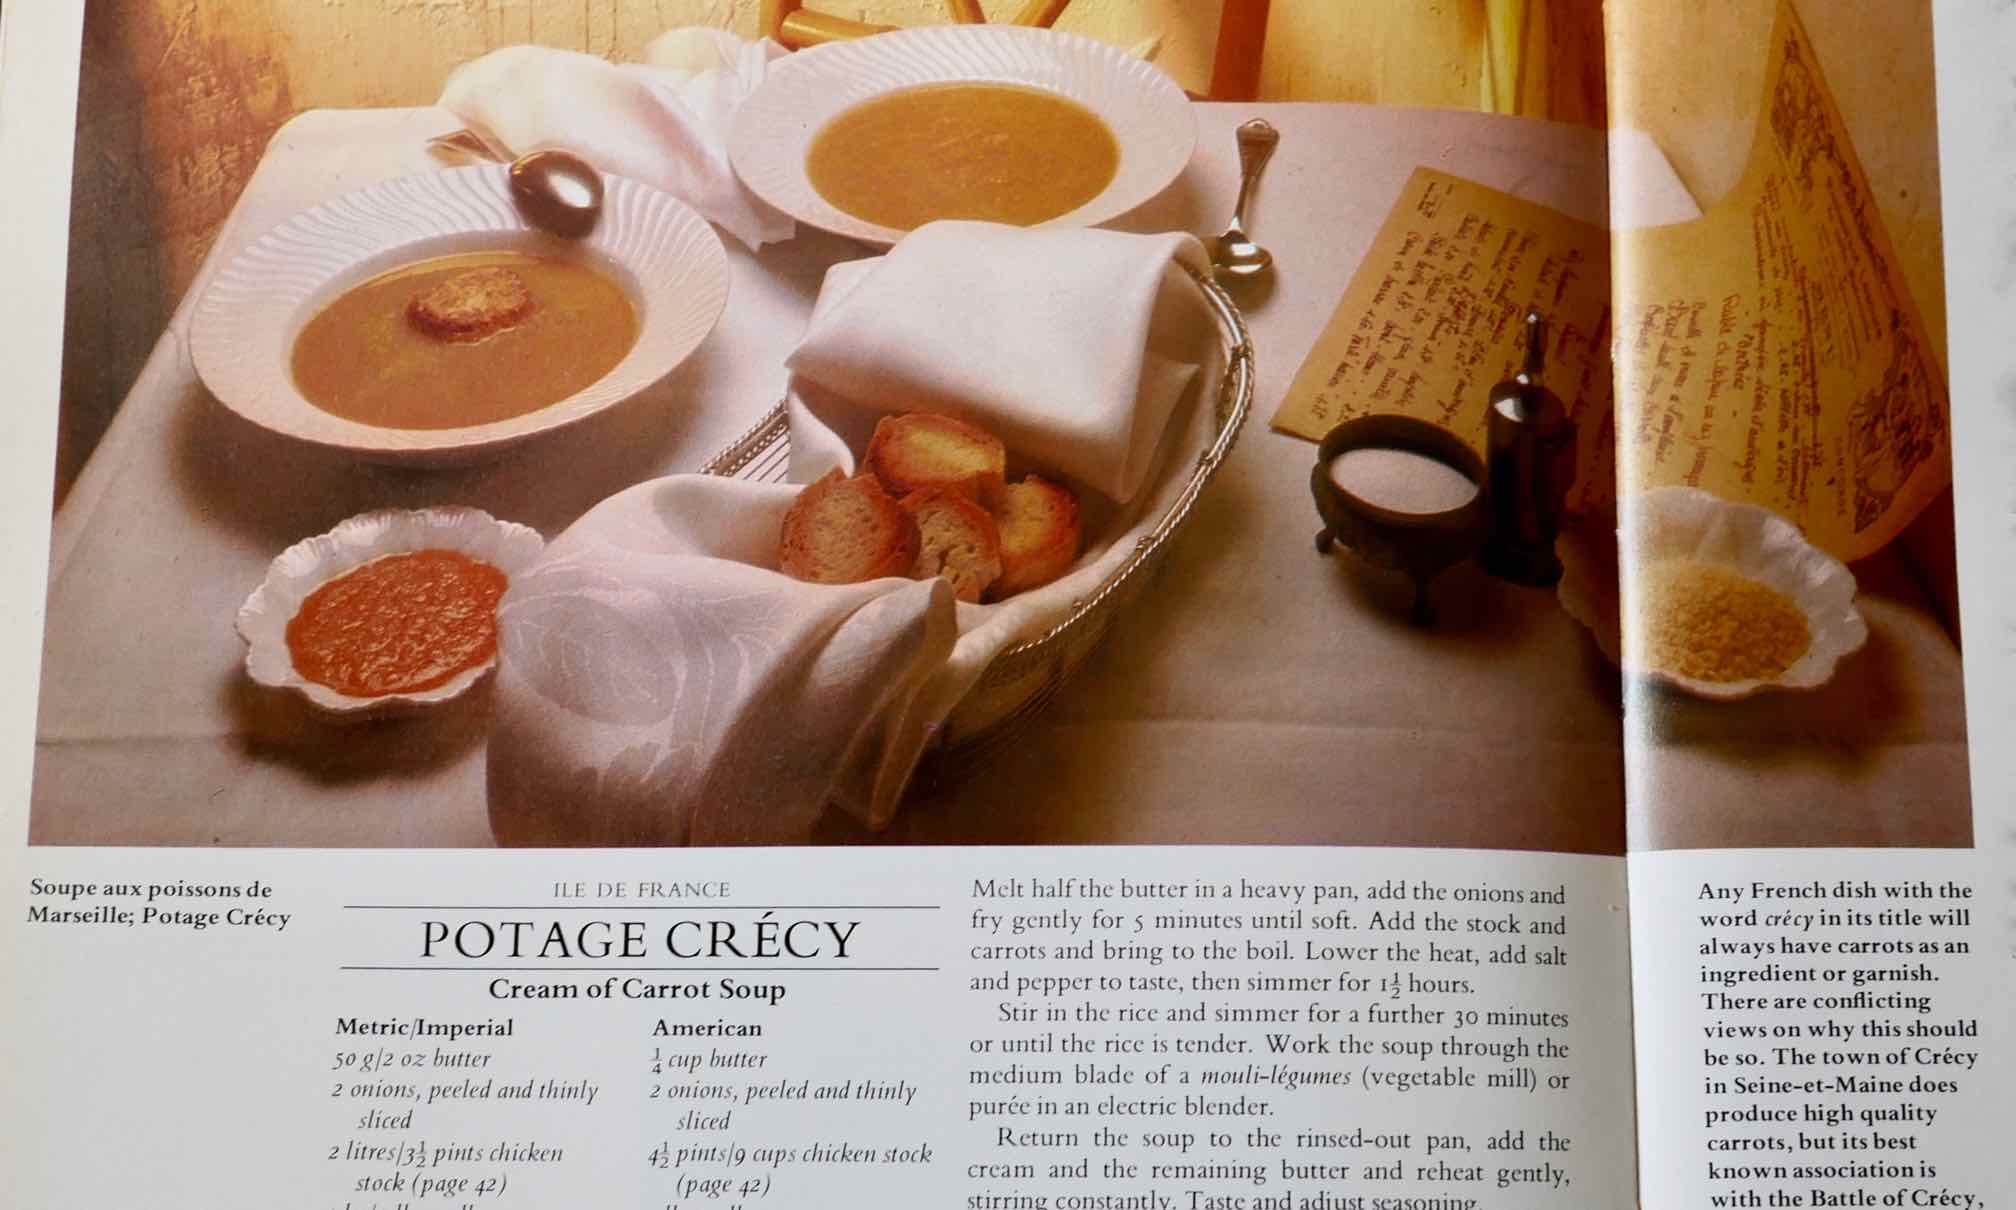 photo from a cookbook showing Potage Crécy, a cream of carrot soup